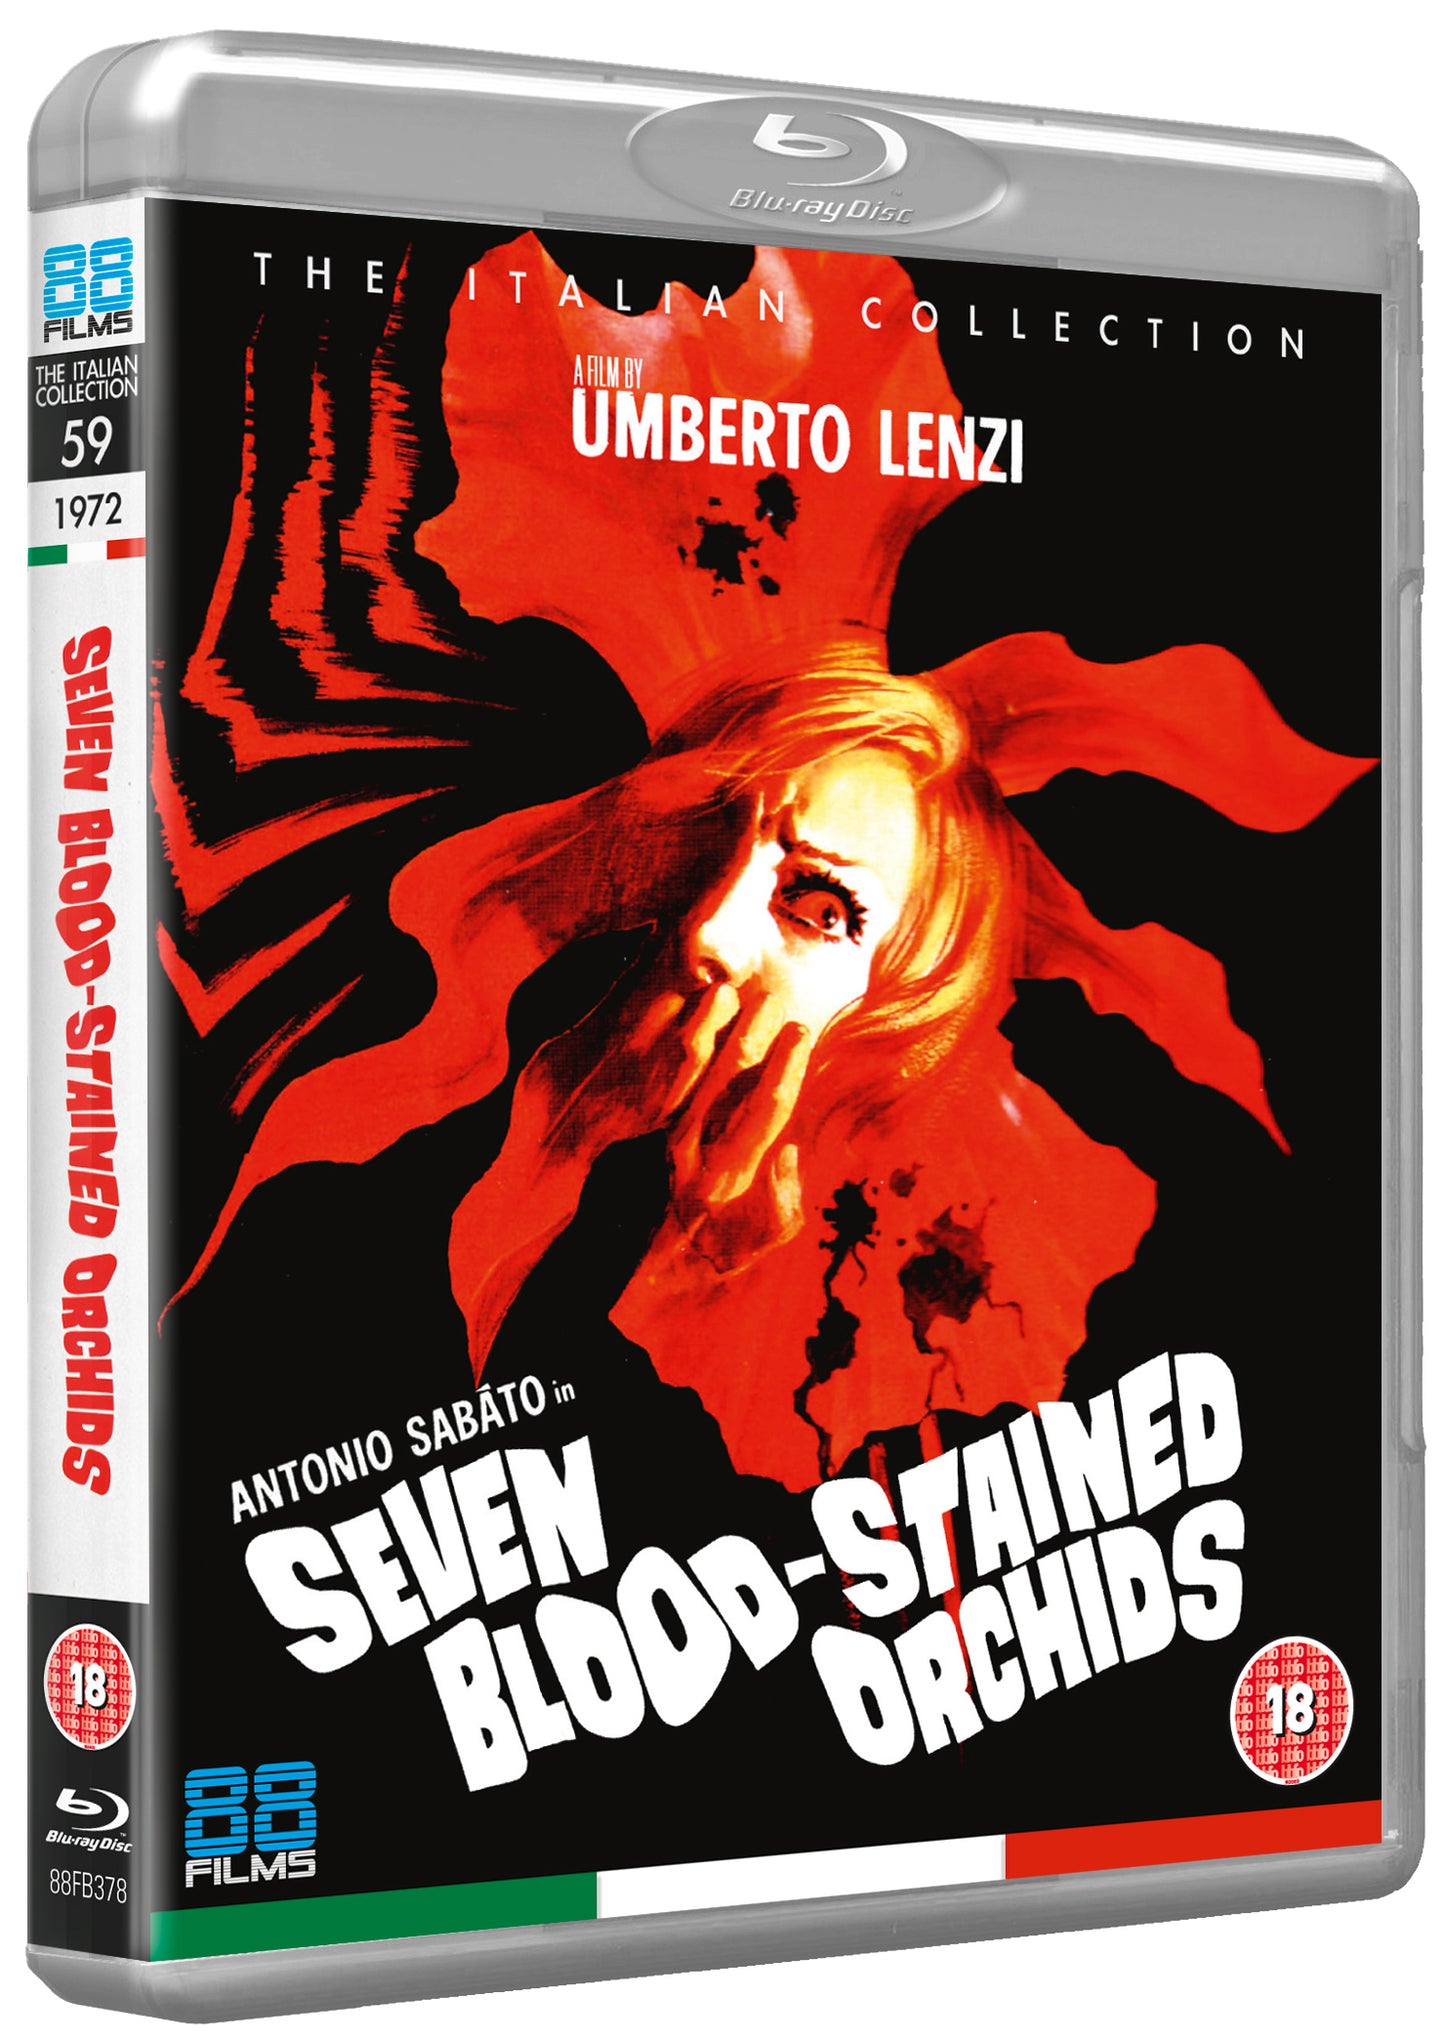 Seven Blood-Stained Orchids - The Italian Collection 59